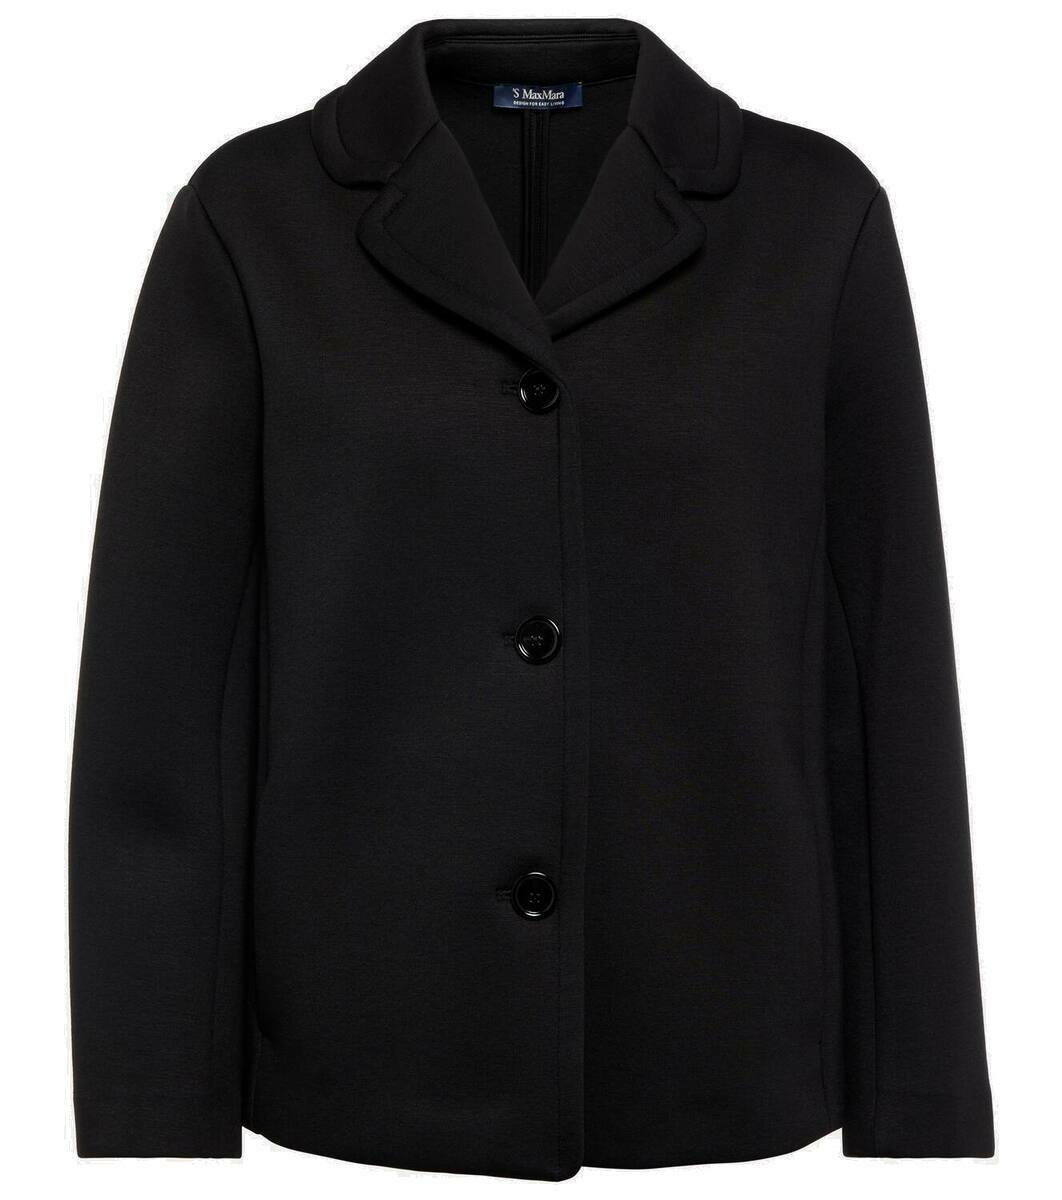 Oceania double-breasted wool jacket